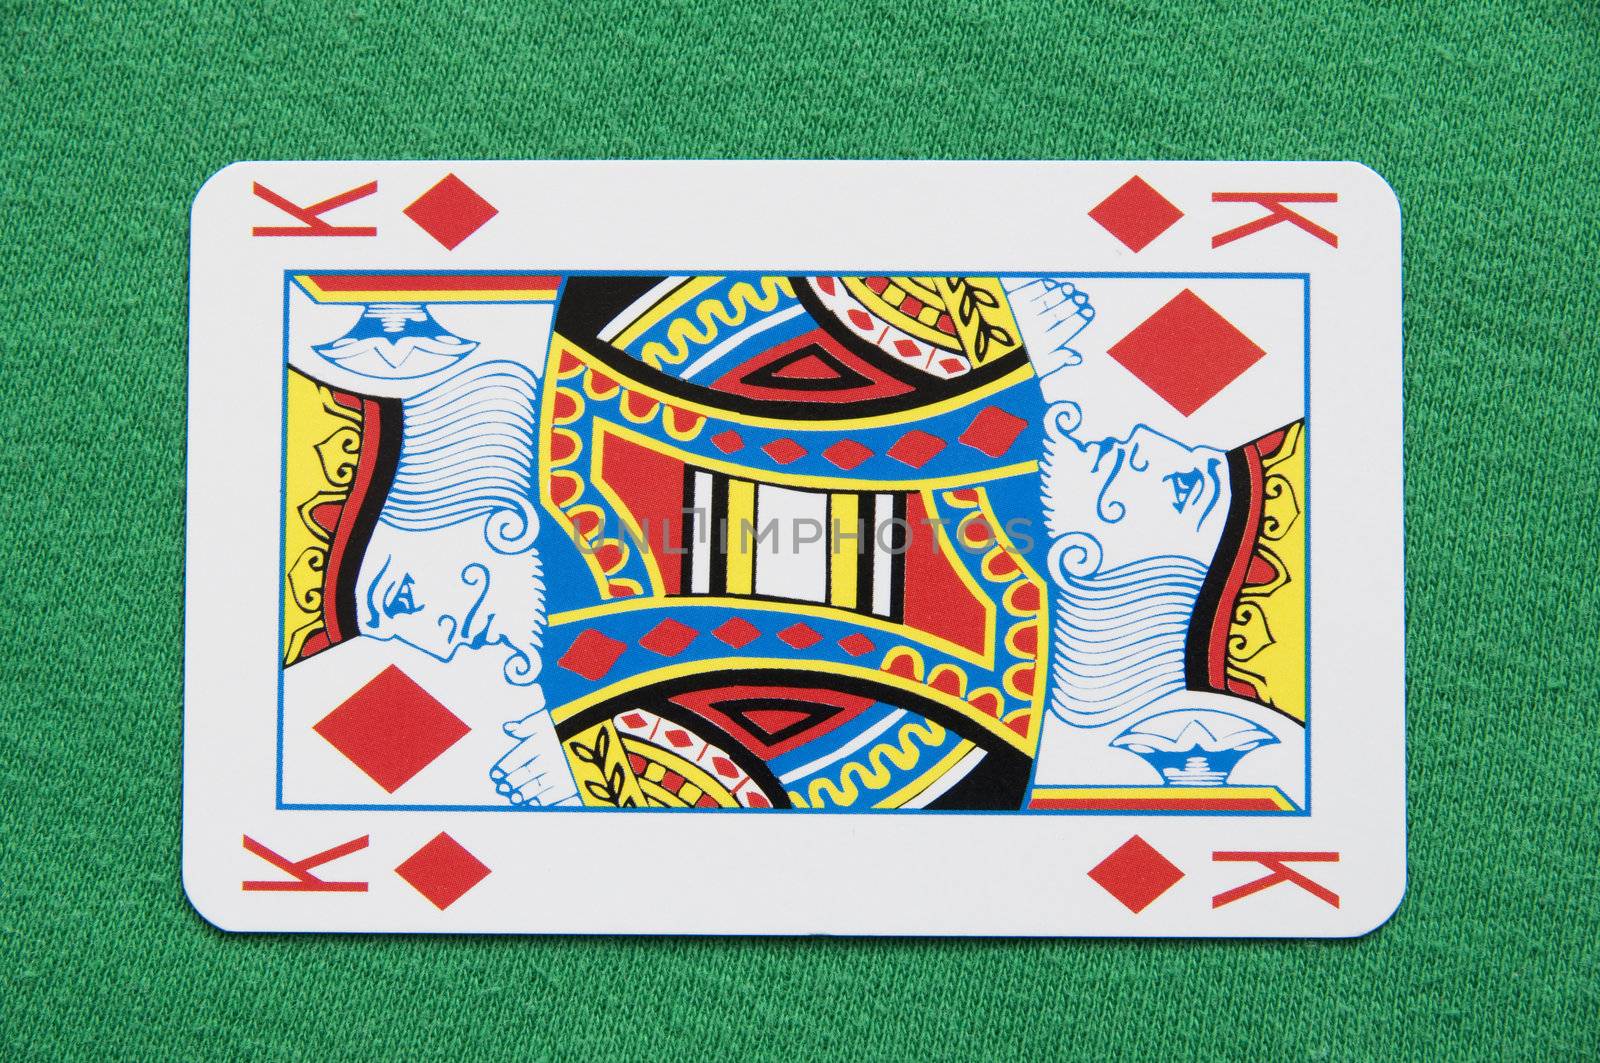 A Colourful Photo of a Isolated King Playing Card